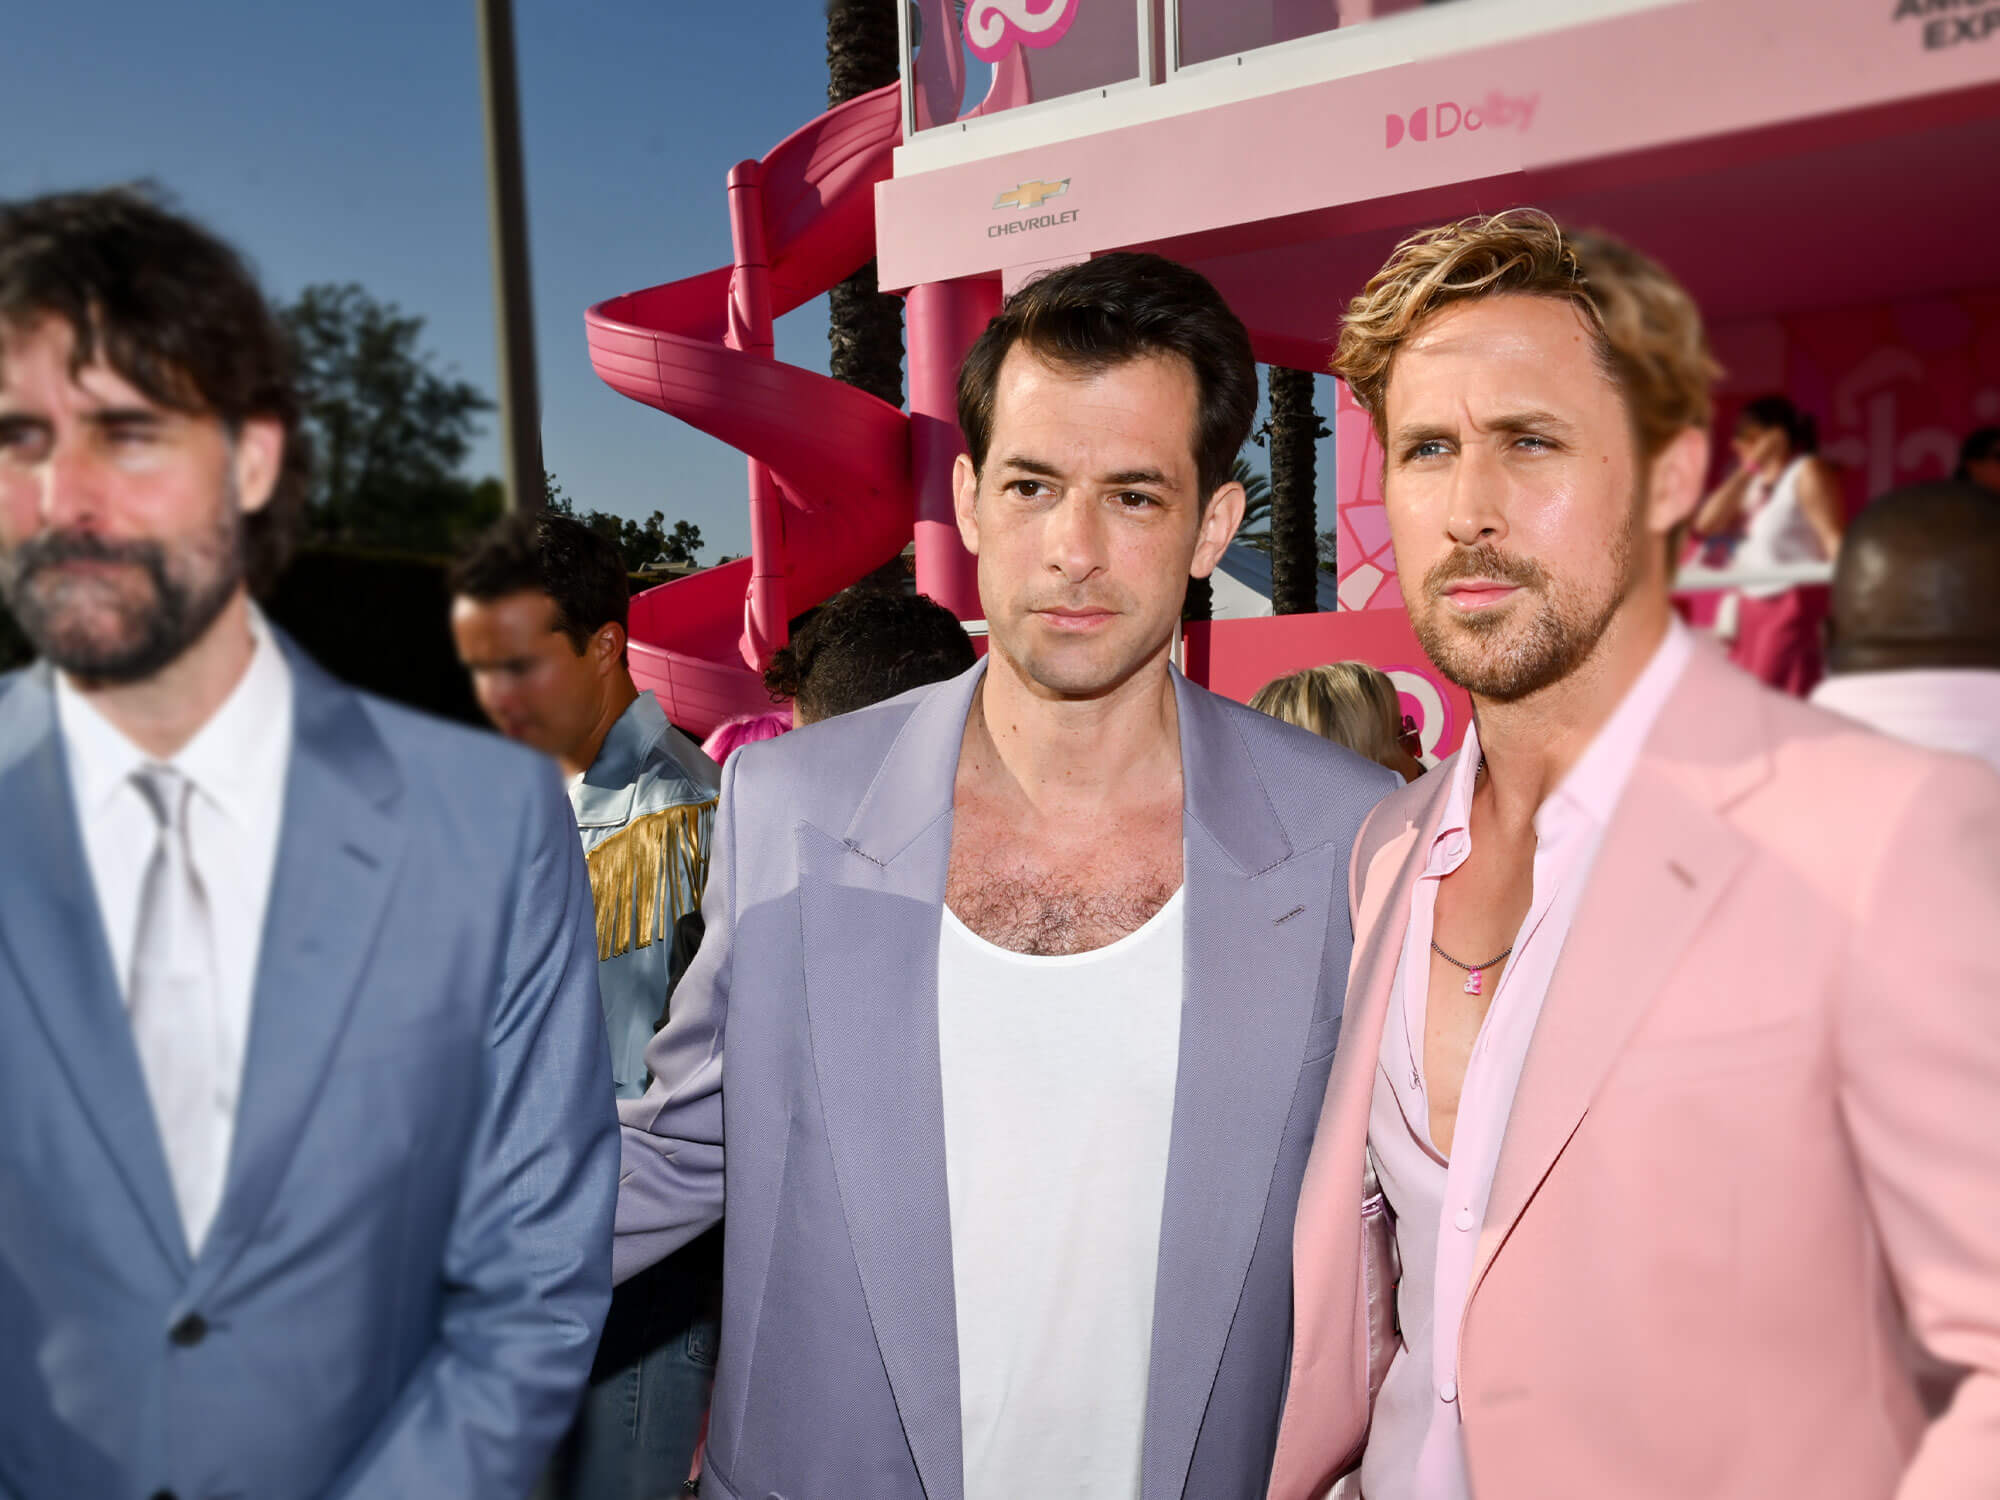 Andrew Wyatt, Mark Ronson and Ryan Gosling at the premiere of "Barbie" held at Shrine Auditorium and Expo Hall on July 9, 2023 in Los Angeles, California. (Photo by Michael Buckner/Variety via Getty Images)